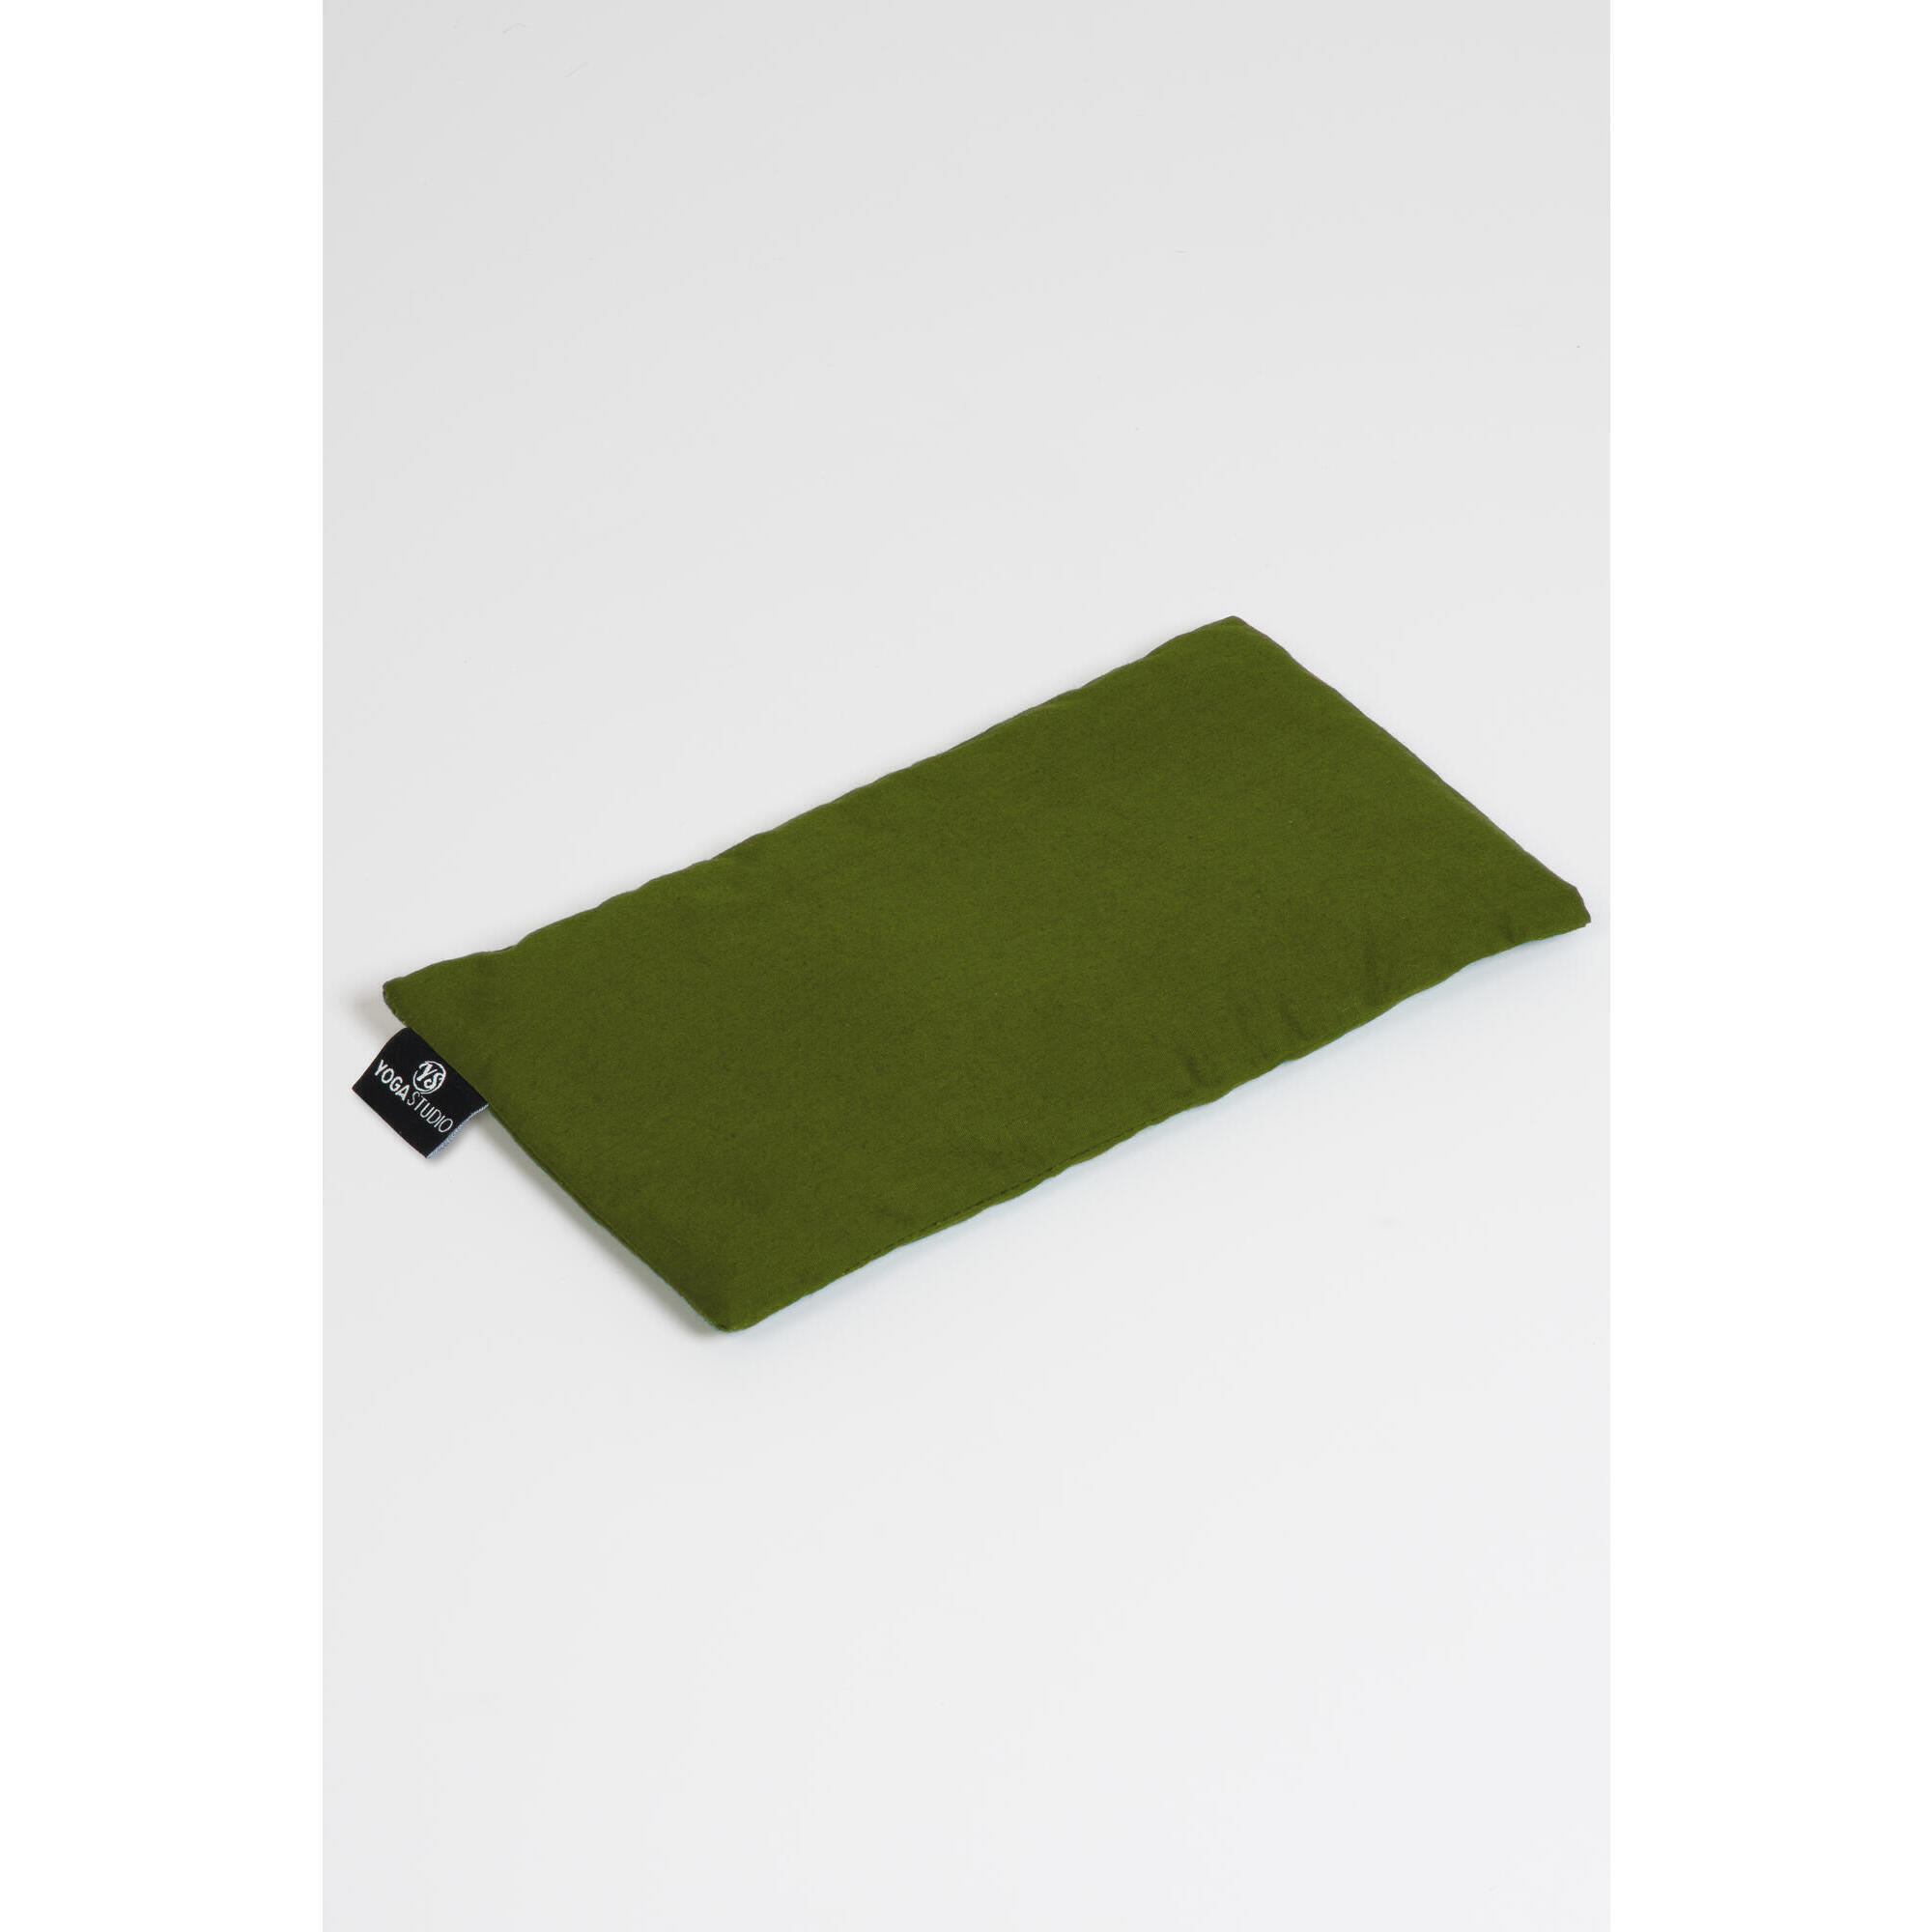 Yoga Studio Scented Lavender & Linseed Eye Pillows - Olive Green 1/2